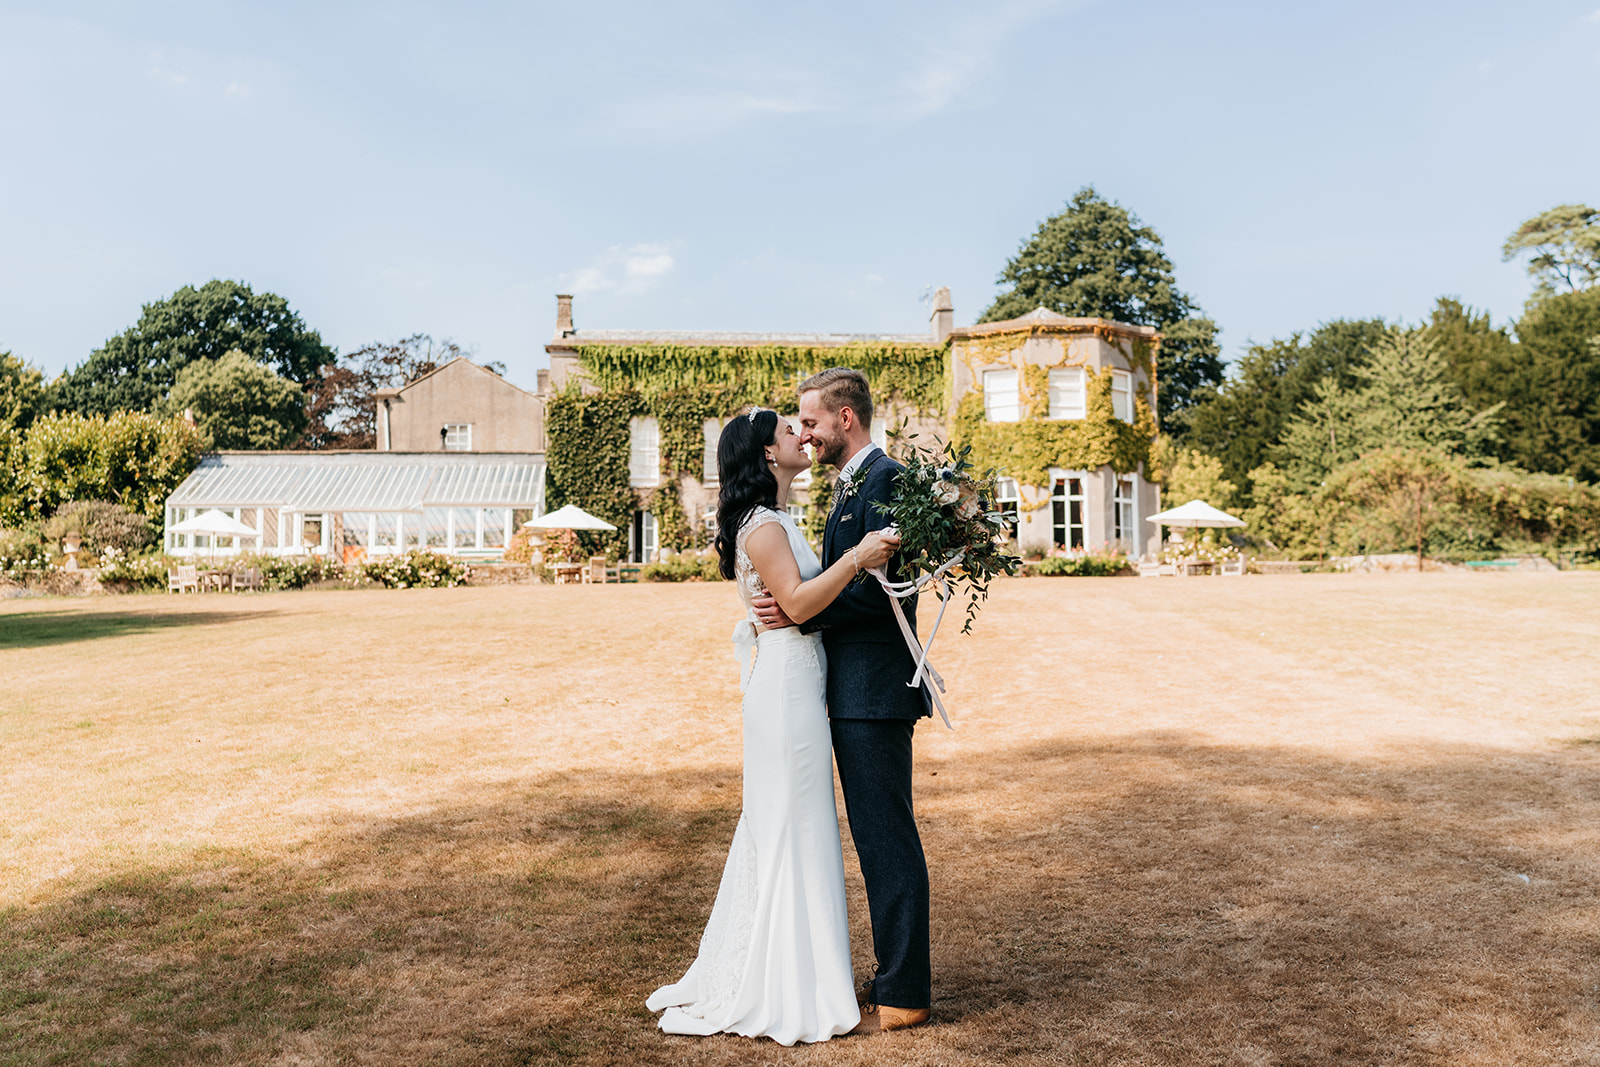 The bride and groom in front of the wedding venue. Pennard house